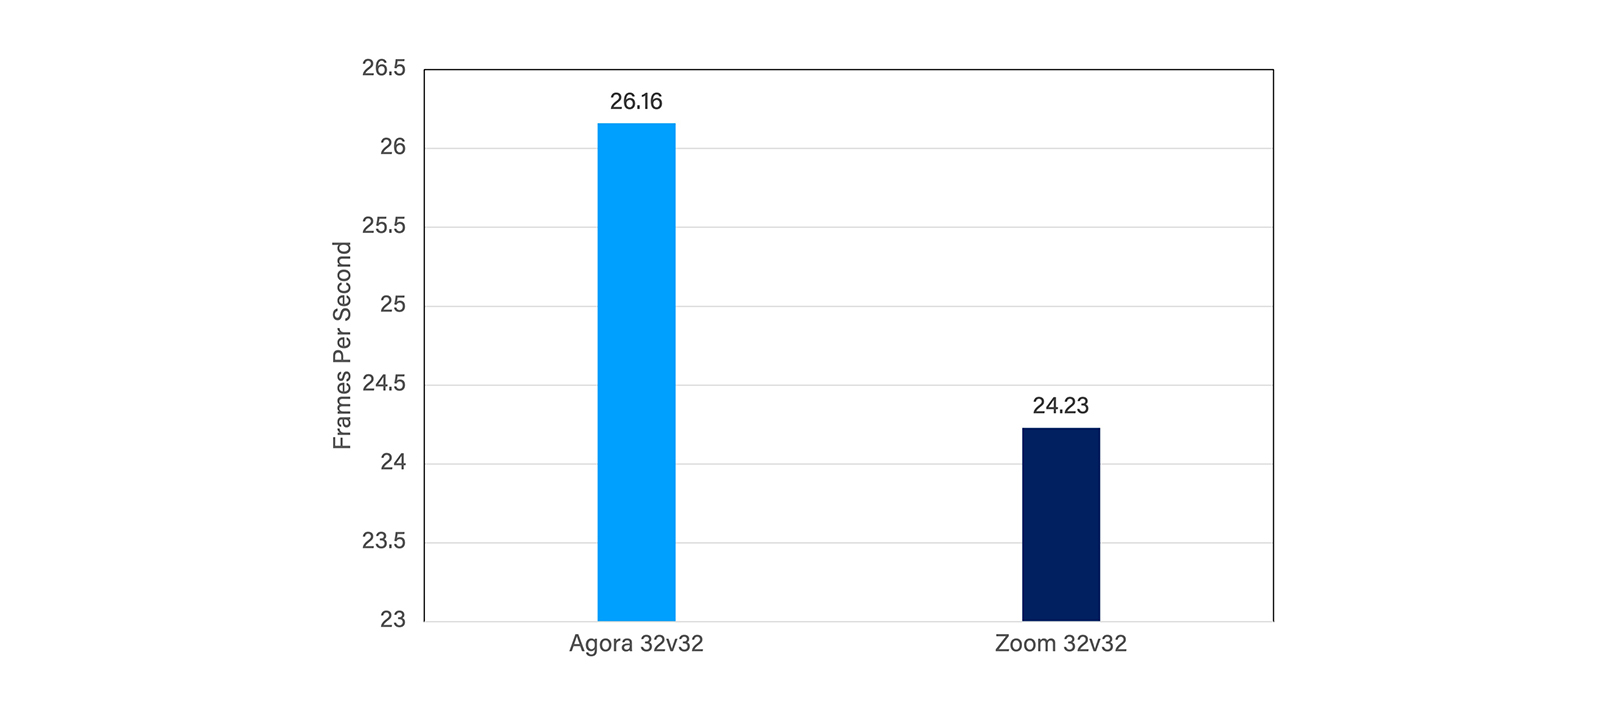 Figure 1: FPS comparison for Agora and Zoom under a normal network condition.